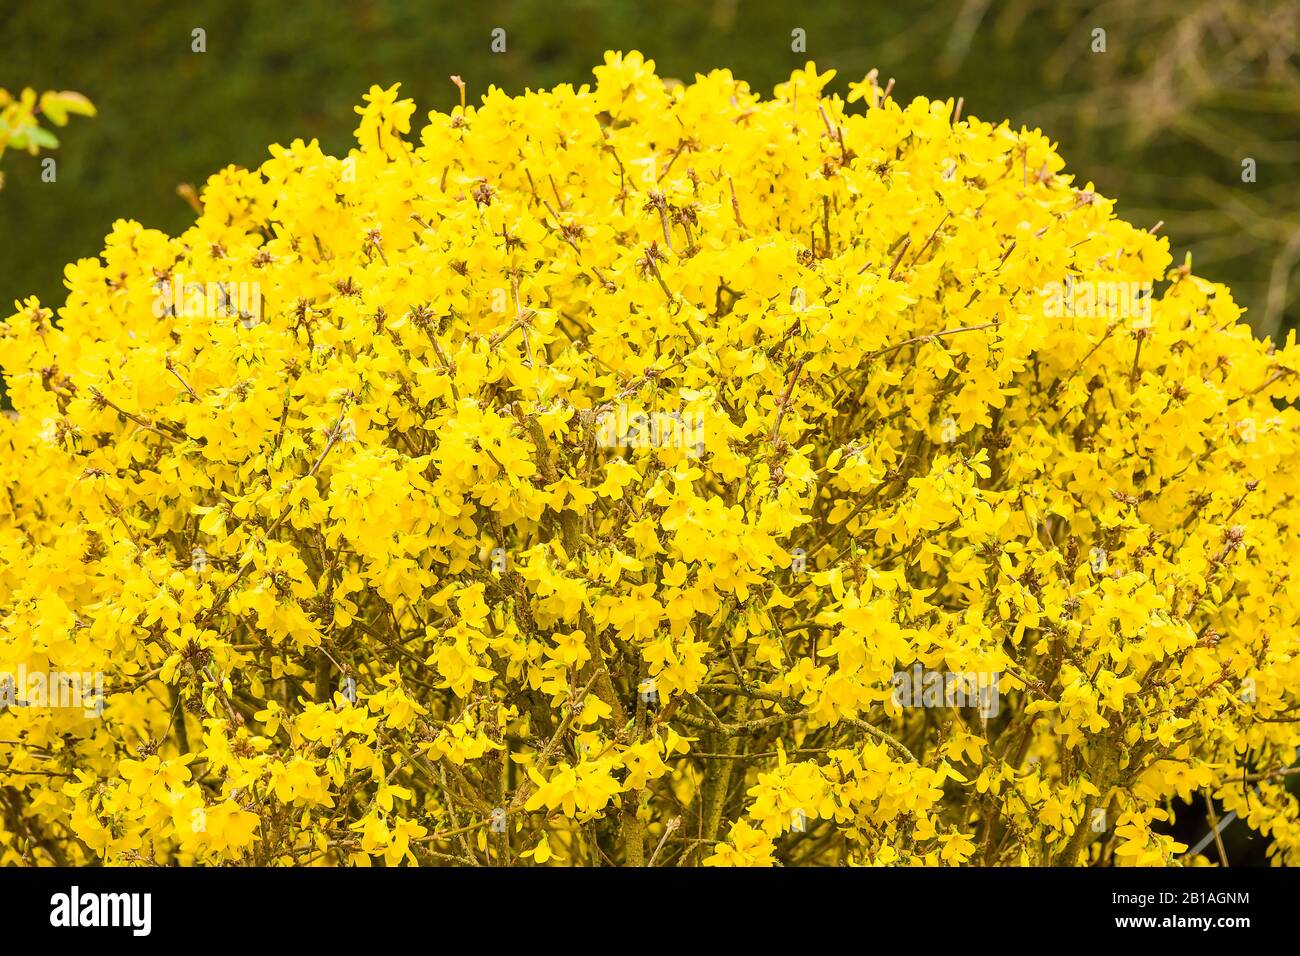 A golden dome of bright yellow florets characterise this lovely well-shaped Forsythia shrub in Spring in an English garden Stock Photo